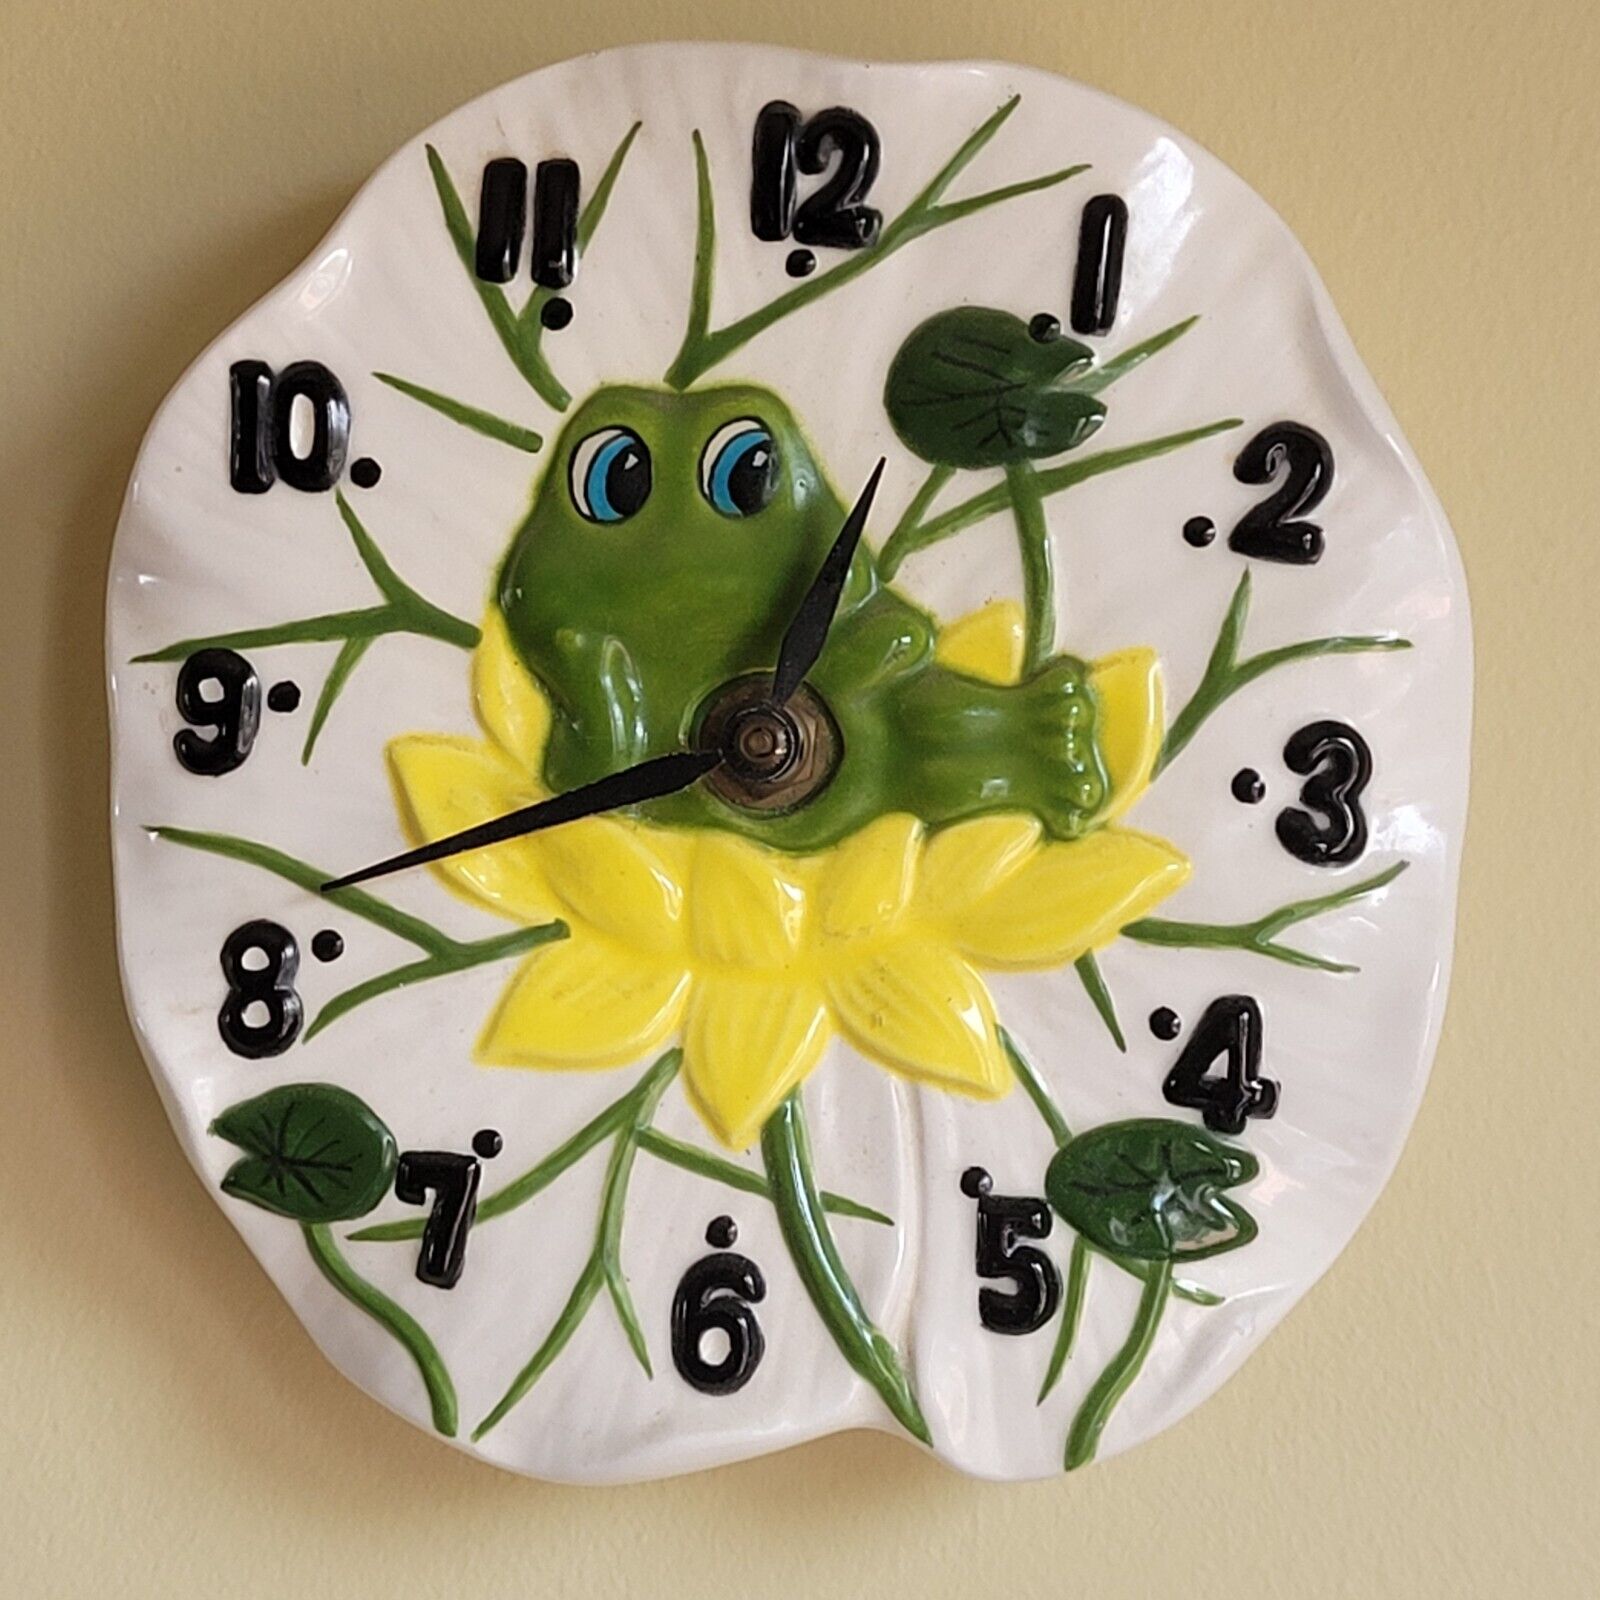 Vintage Sears Roebuck Neil The Frog Wall Clock Battery Operated / Not Working